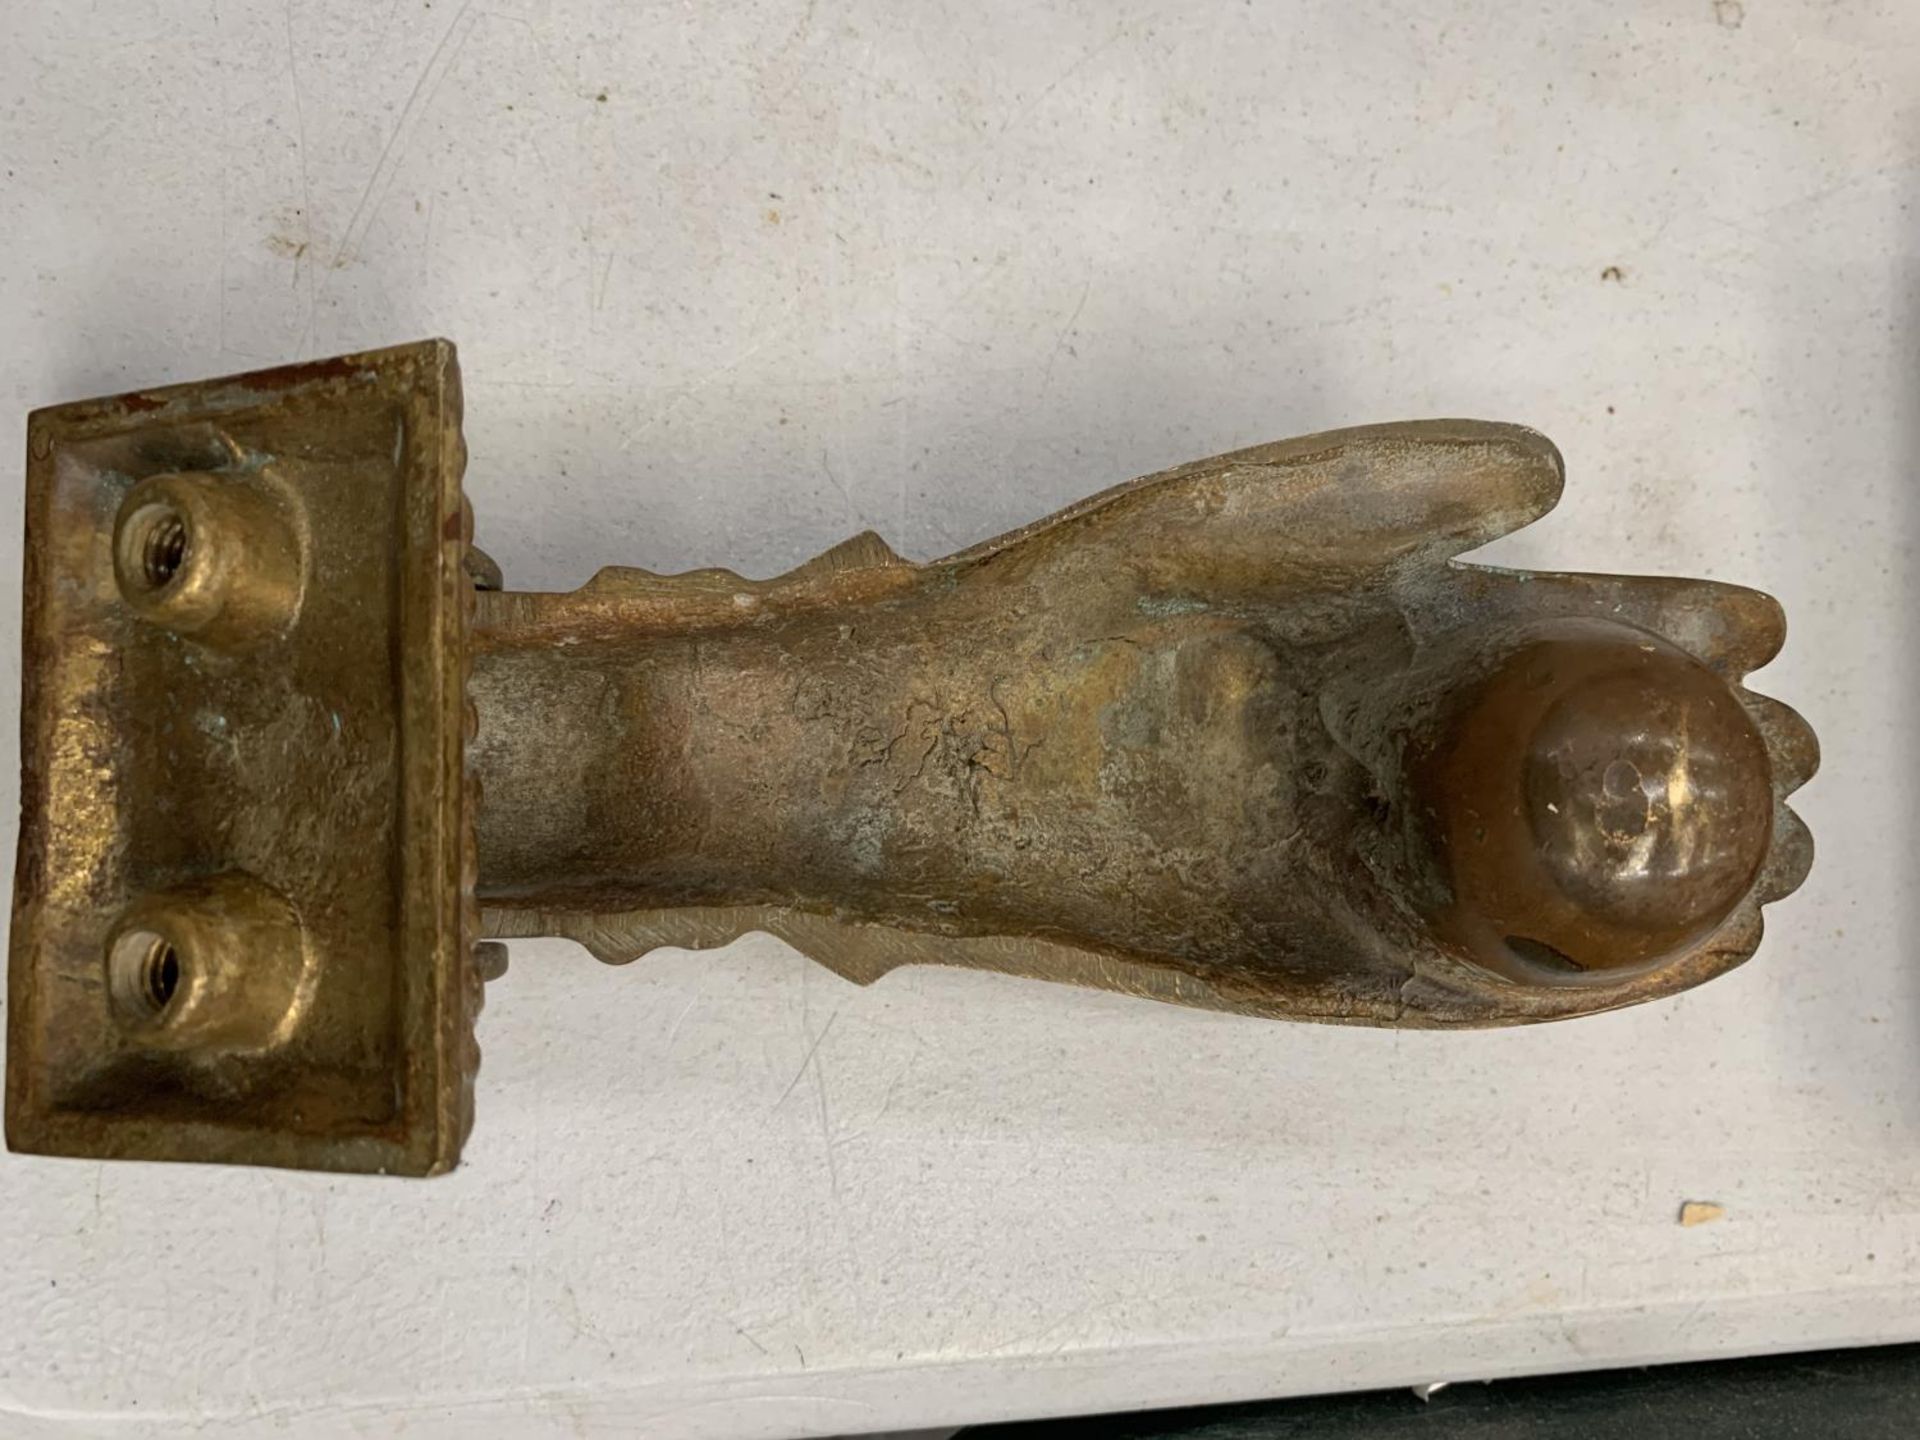 A VINTAGE BRASS DOOR KNOCKER IN THE SHAPE OF A HAND - Image 3 of 3